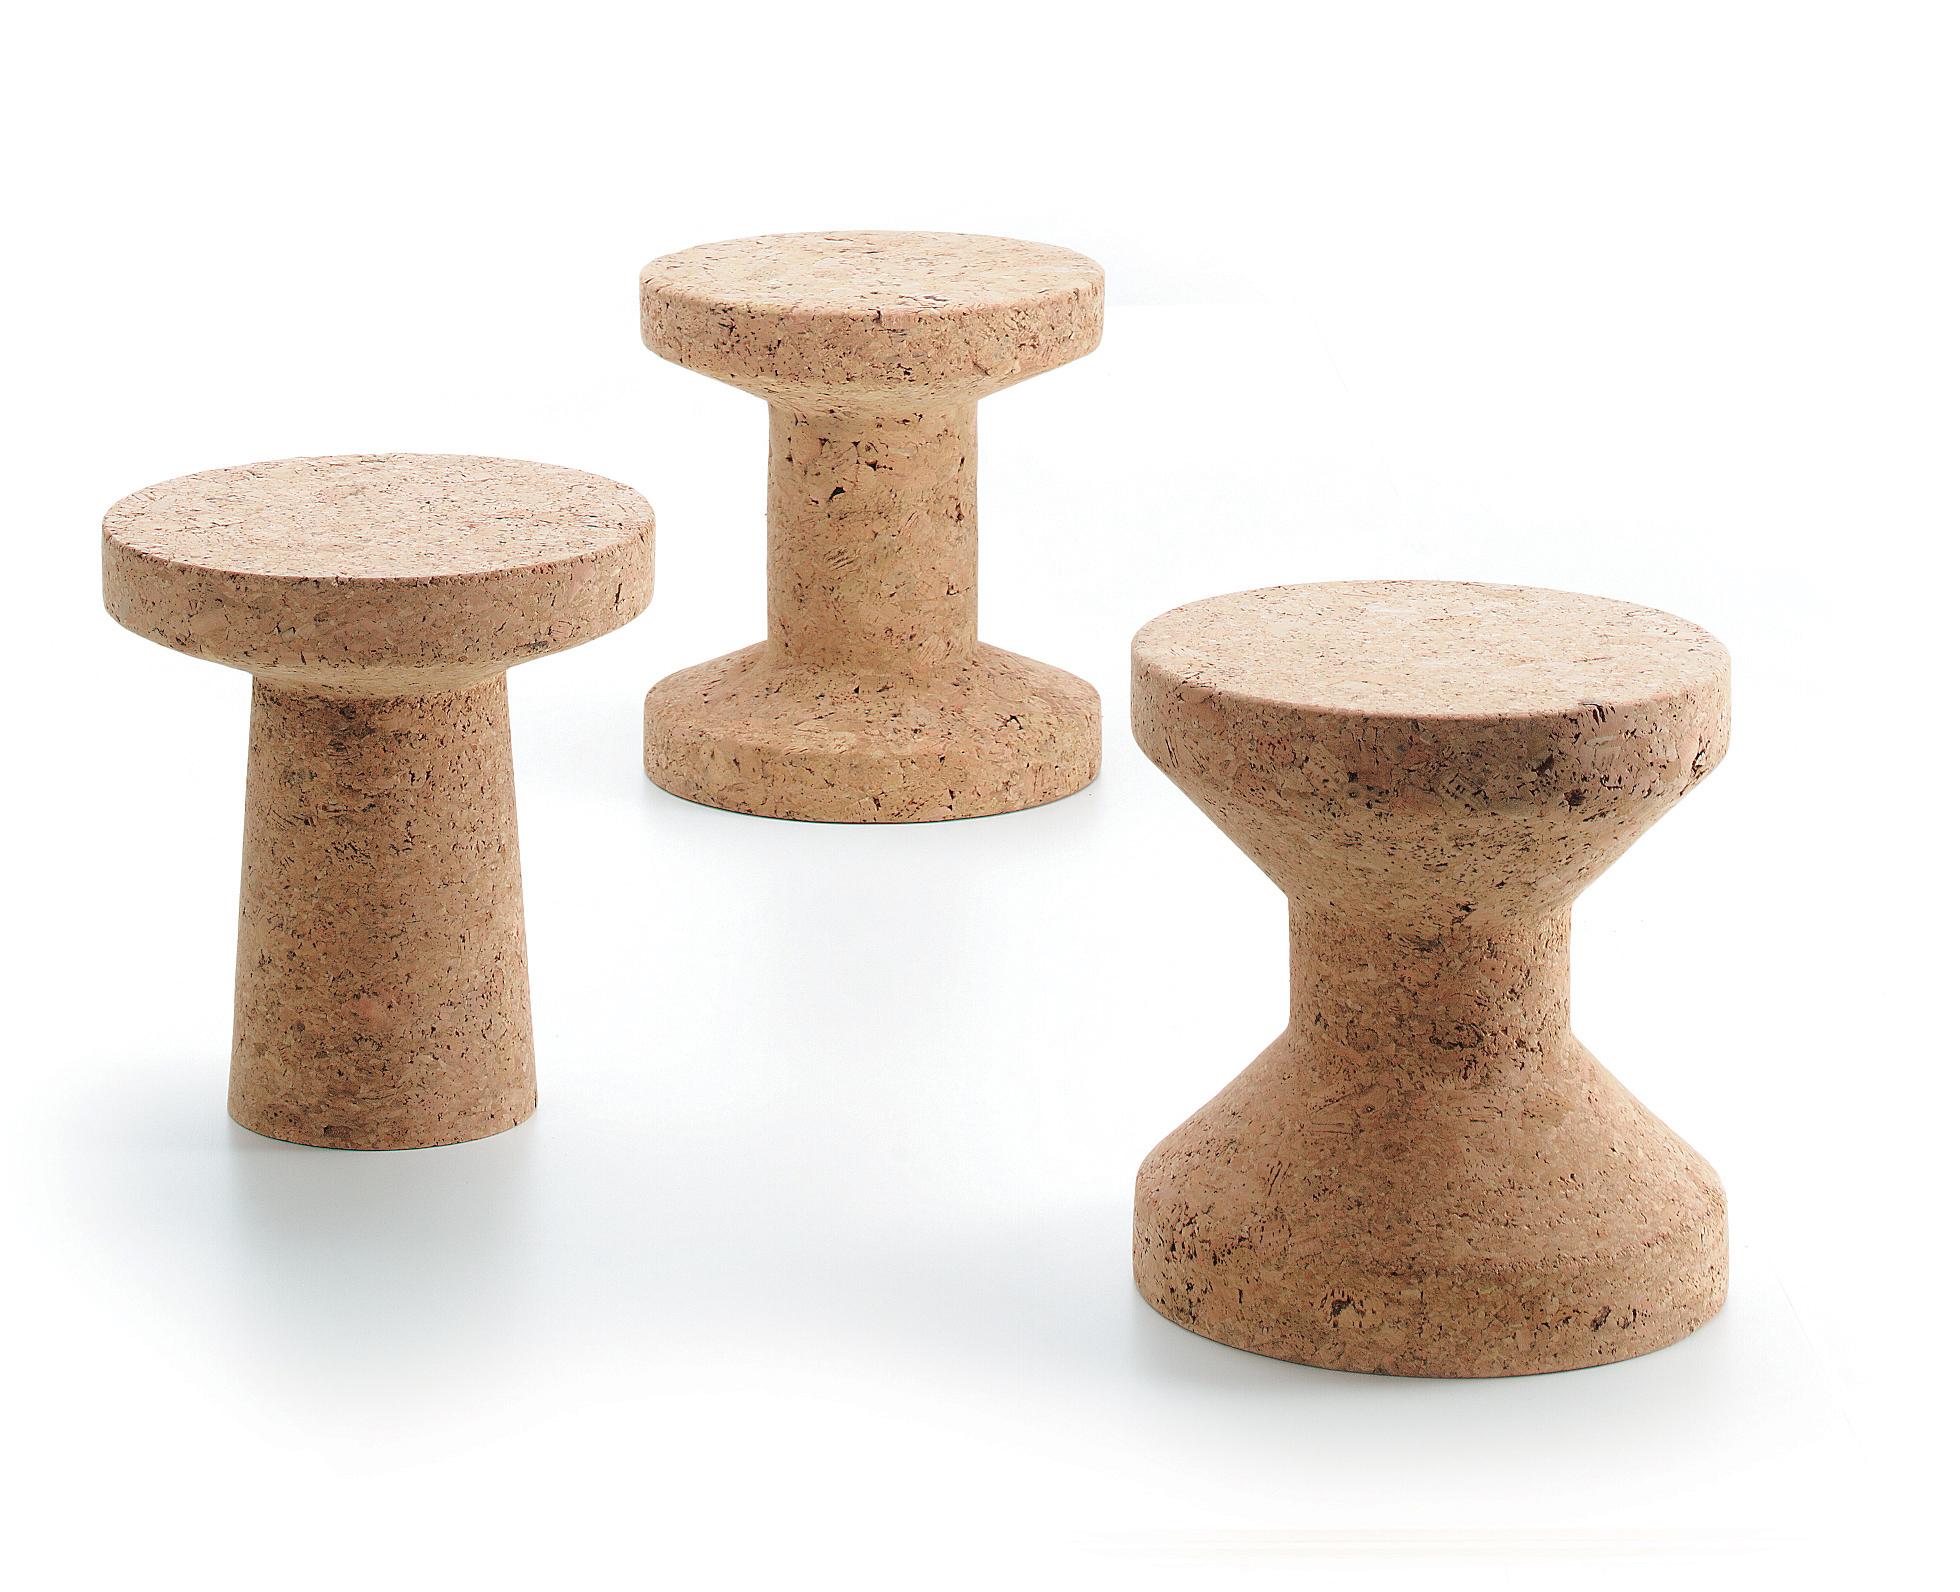 Stabile and robust, the three stools or side tables of the Cork Family by Jasper Morrison exploit the advantageous natural properties of cork: they are comparatively lightweight and extremely durable with a pleasant velvety feel.